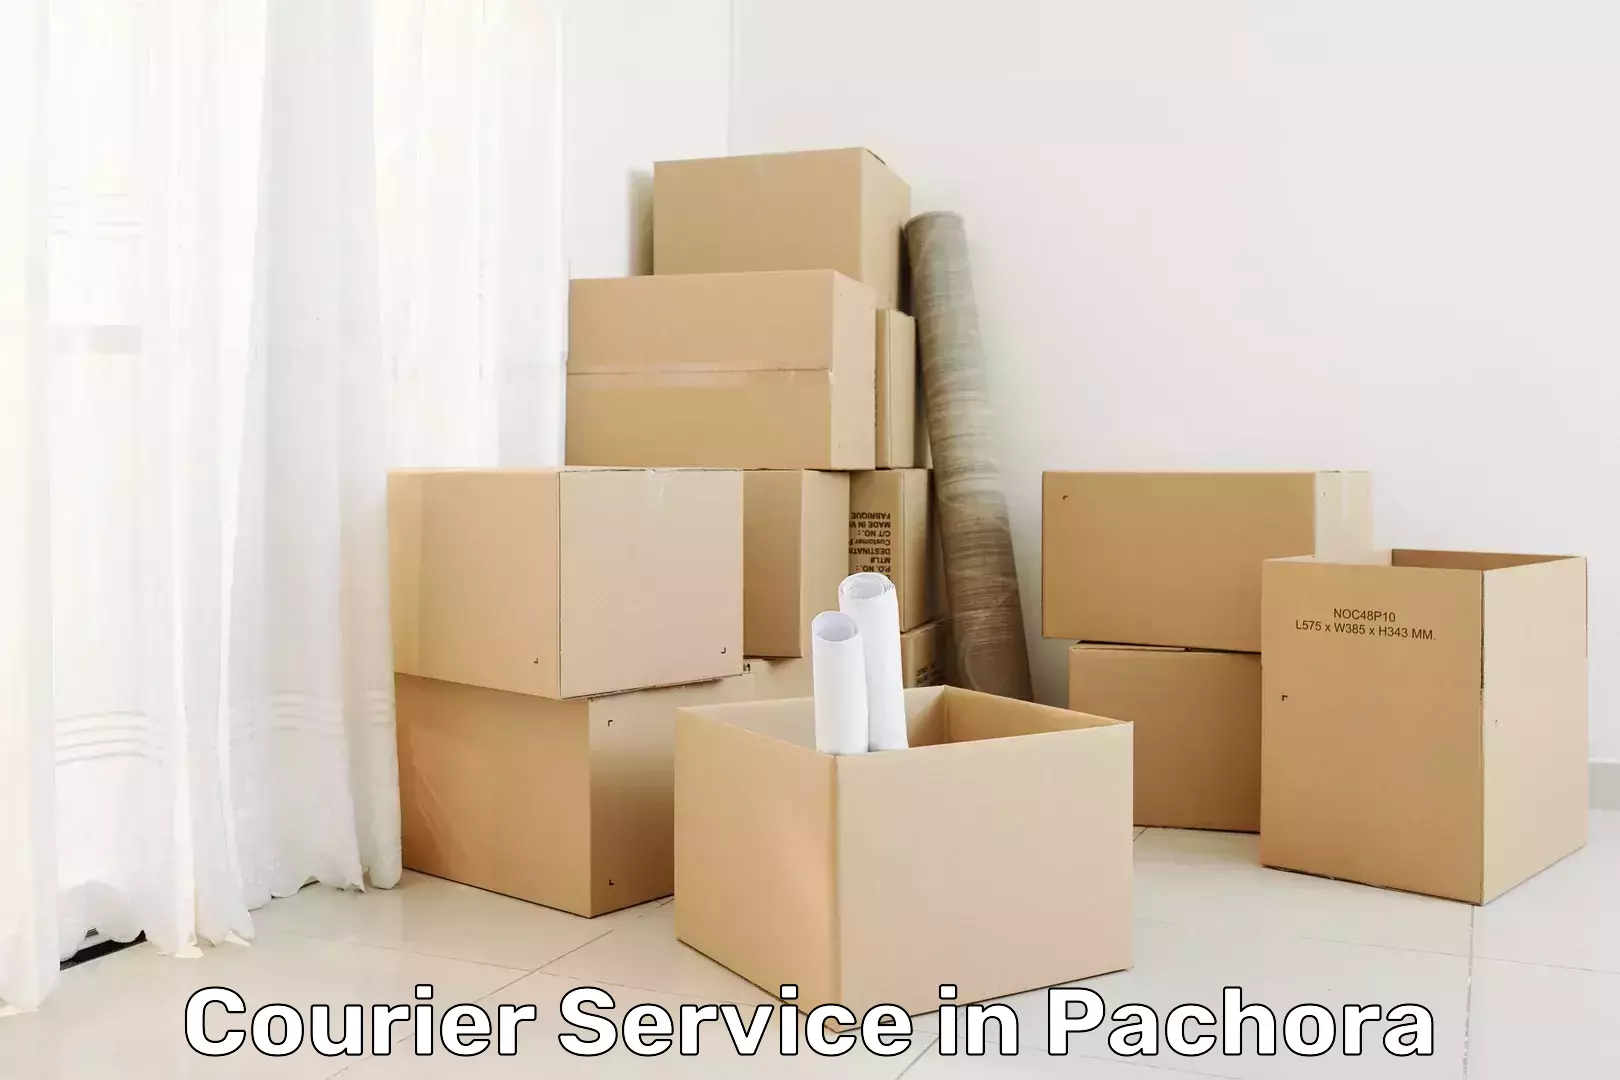 Sustainable shipping practices in Pachora